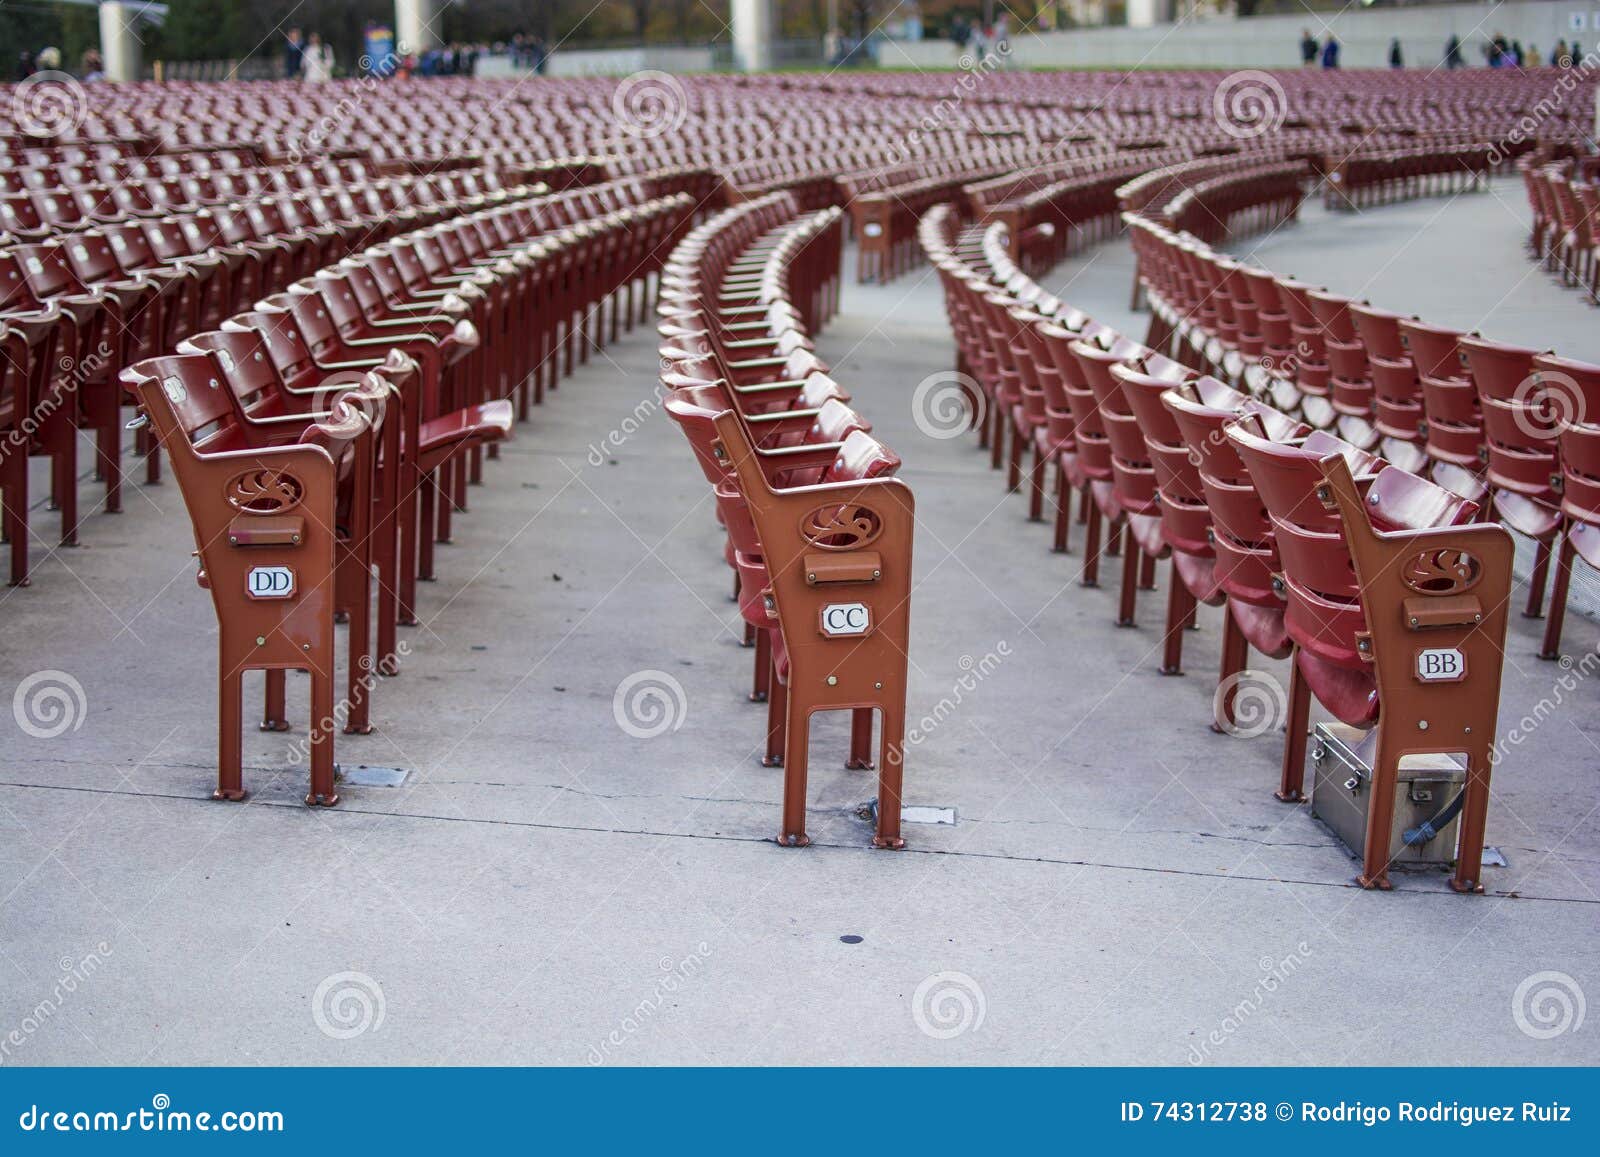 rows of red chairs in the auditorium